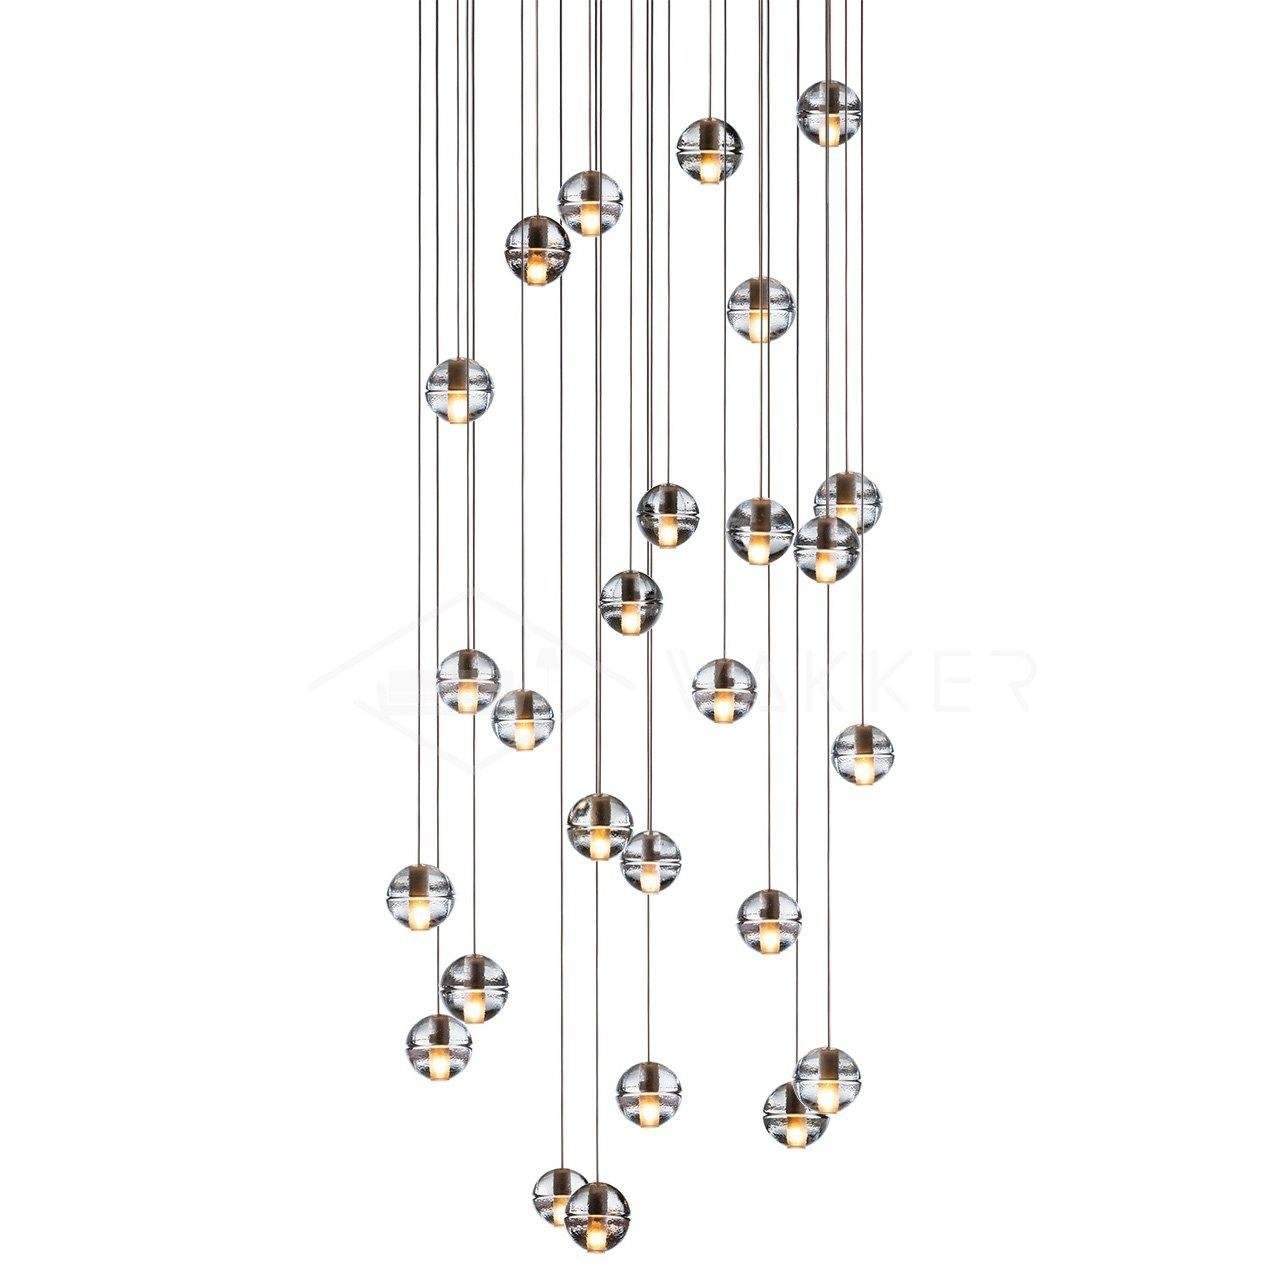 26-Head Square Canopy Round K9 Crystal Pendant Lamp